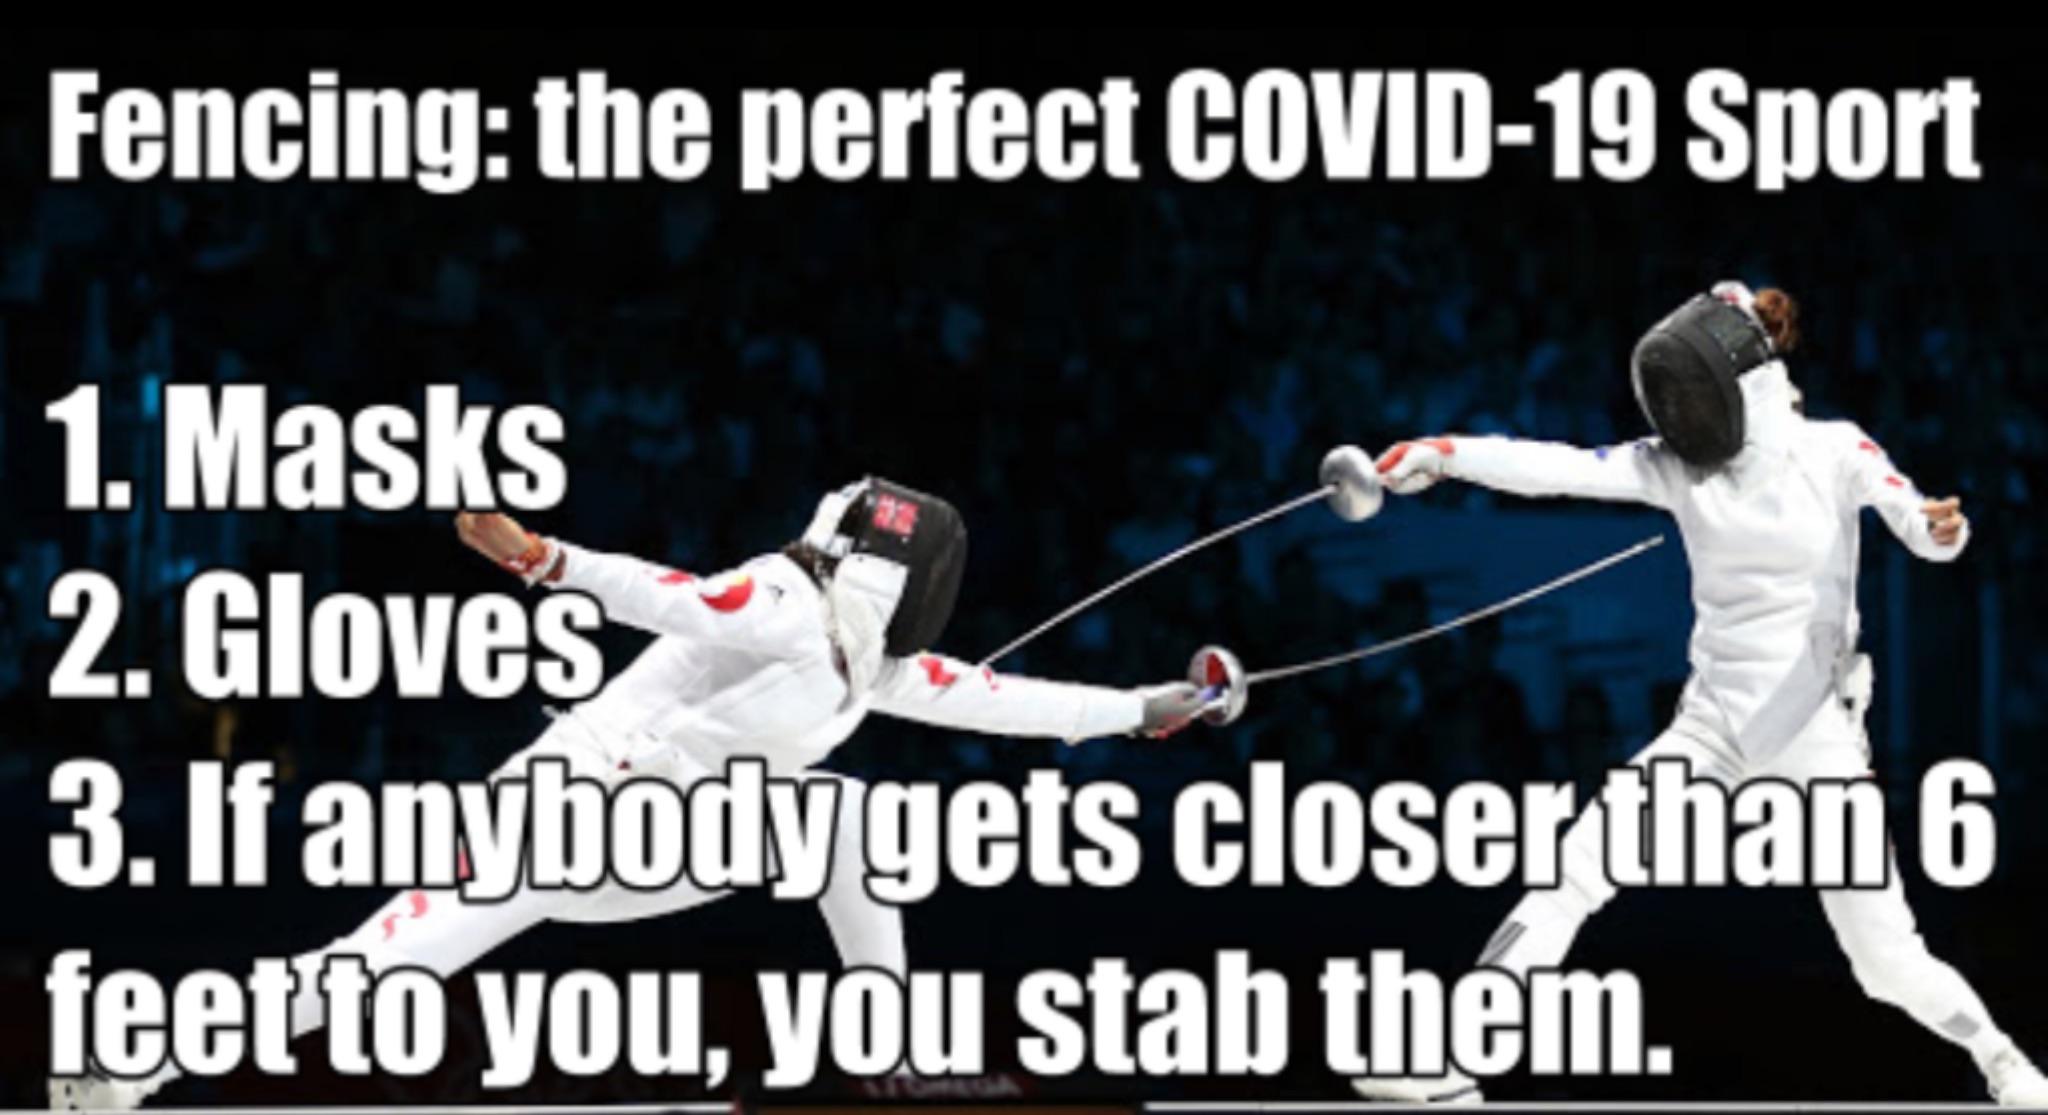 Fencing is the perfect Covid-19 sport